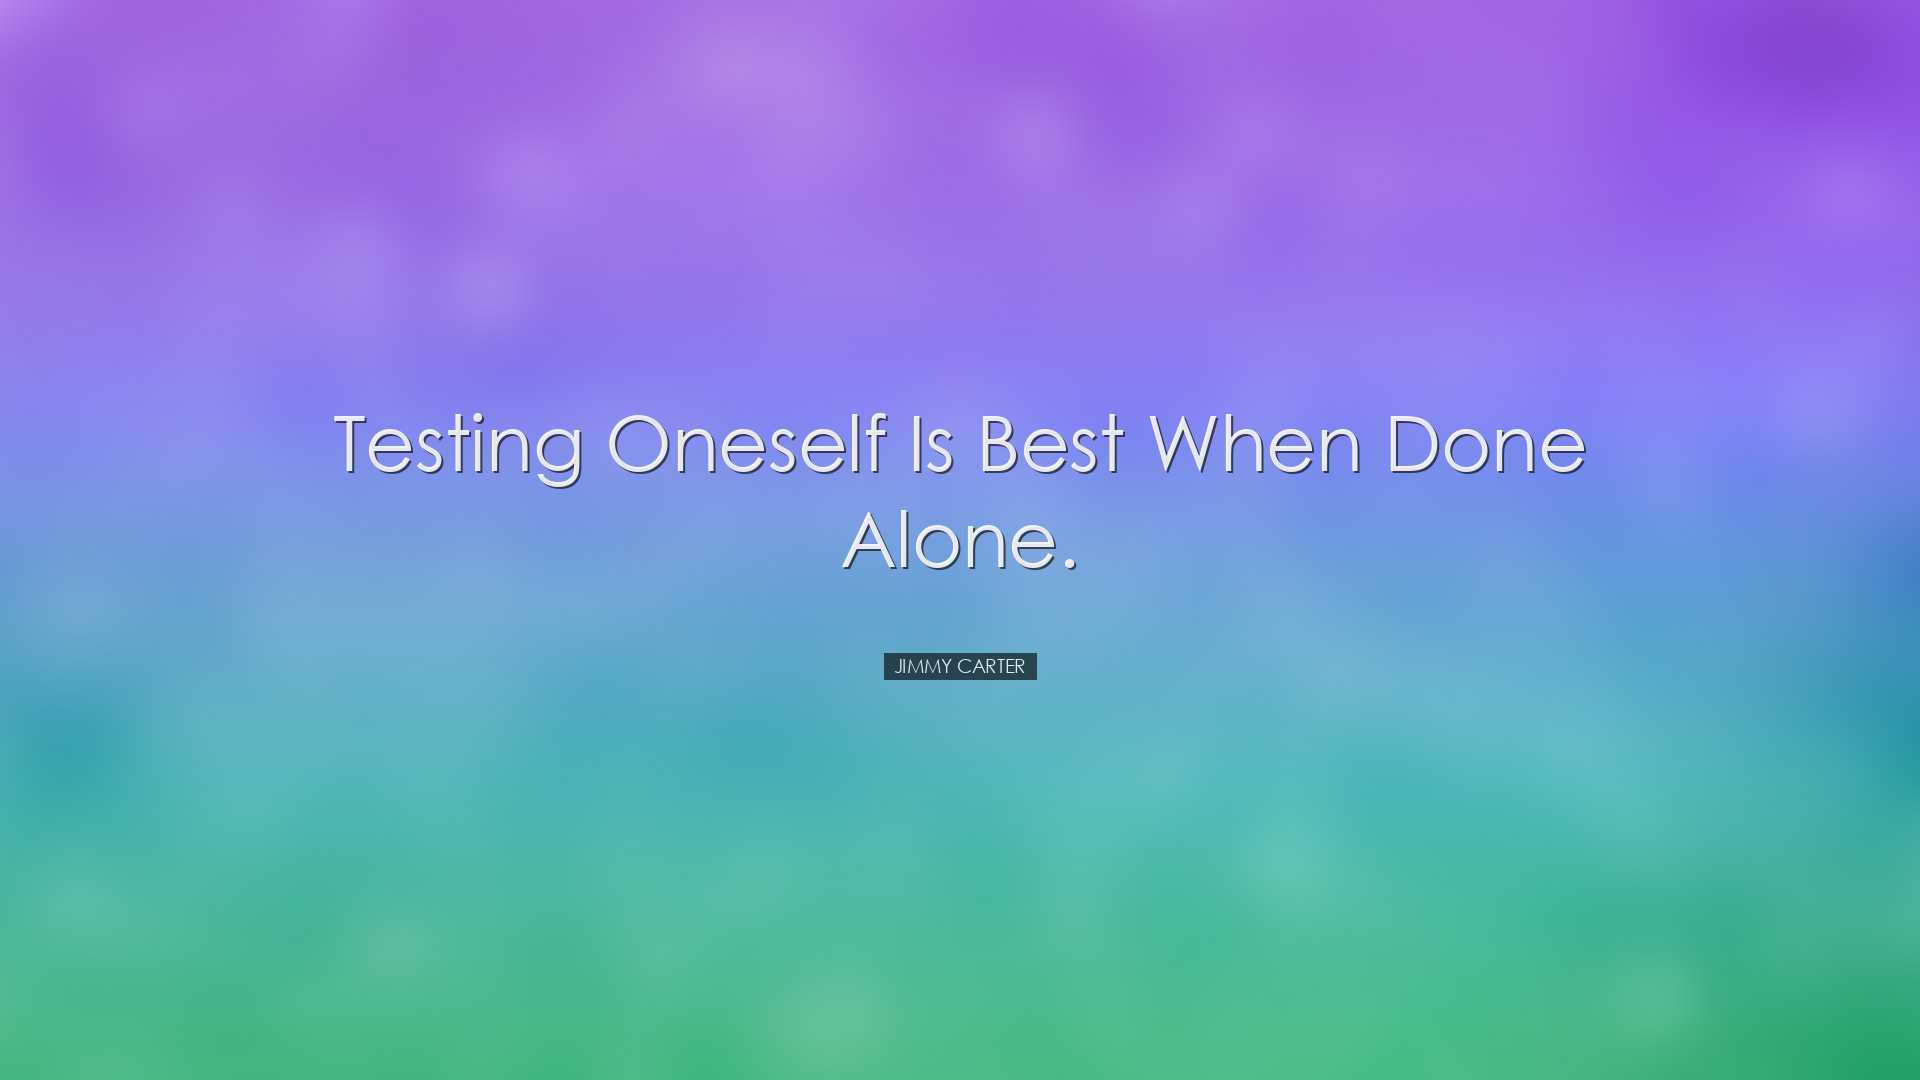 Testing oneself is best when done alone. - Jimmy Carter